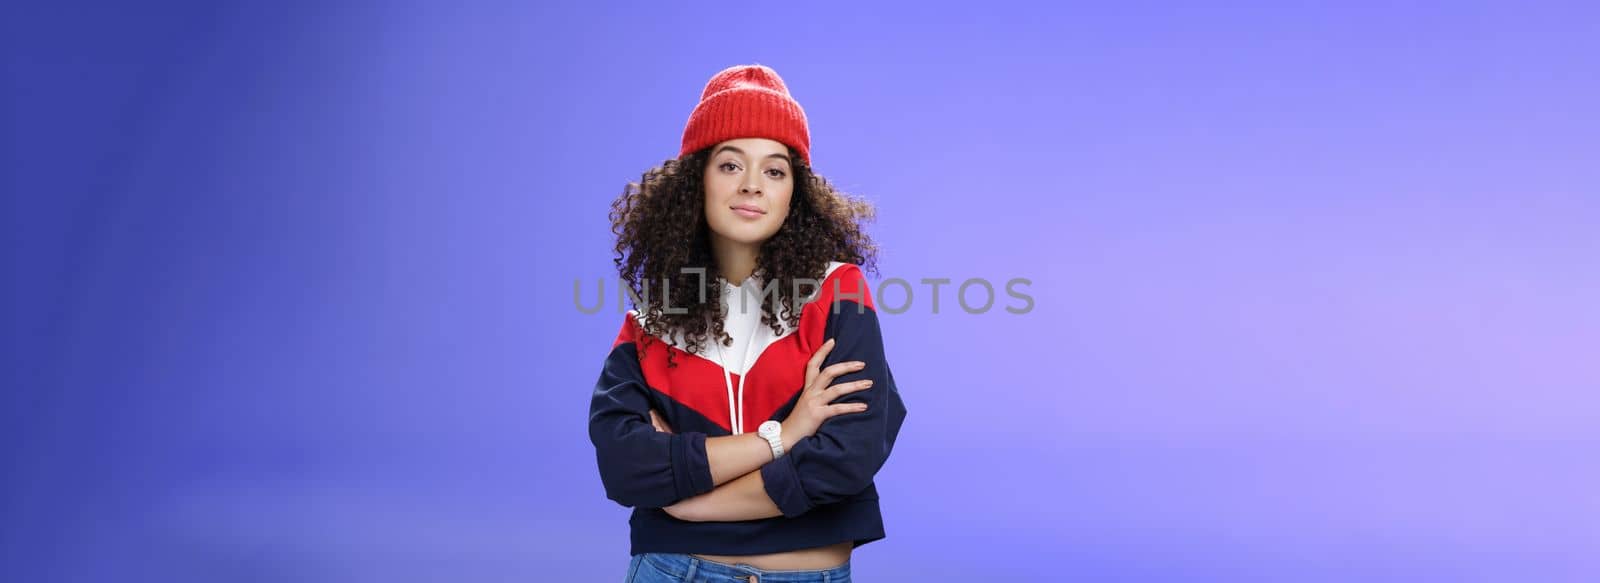 Girl will show winter who boss. Confident and stylish self-assured attractive woman with curly hair in cute red beanie and warm sweatshirt holding hands crossed over chest and looking daring at camera. Fashion, weather and people concept